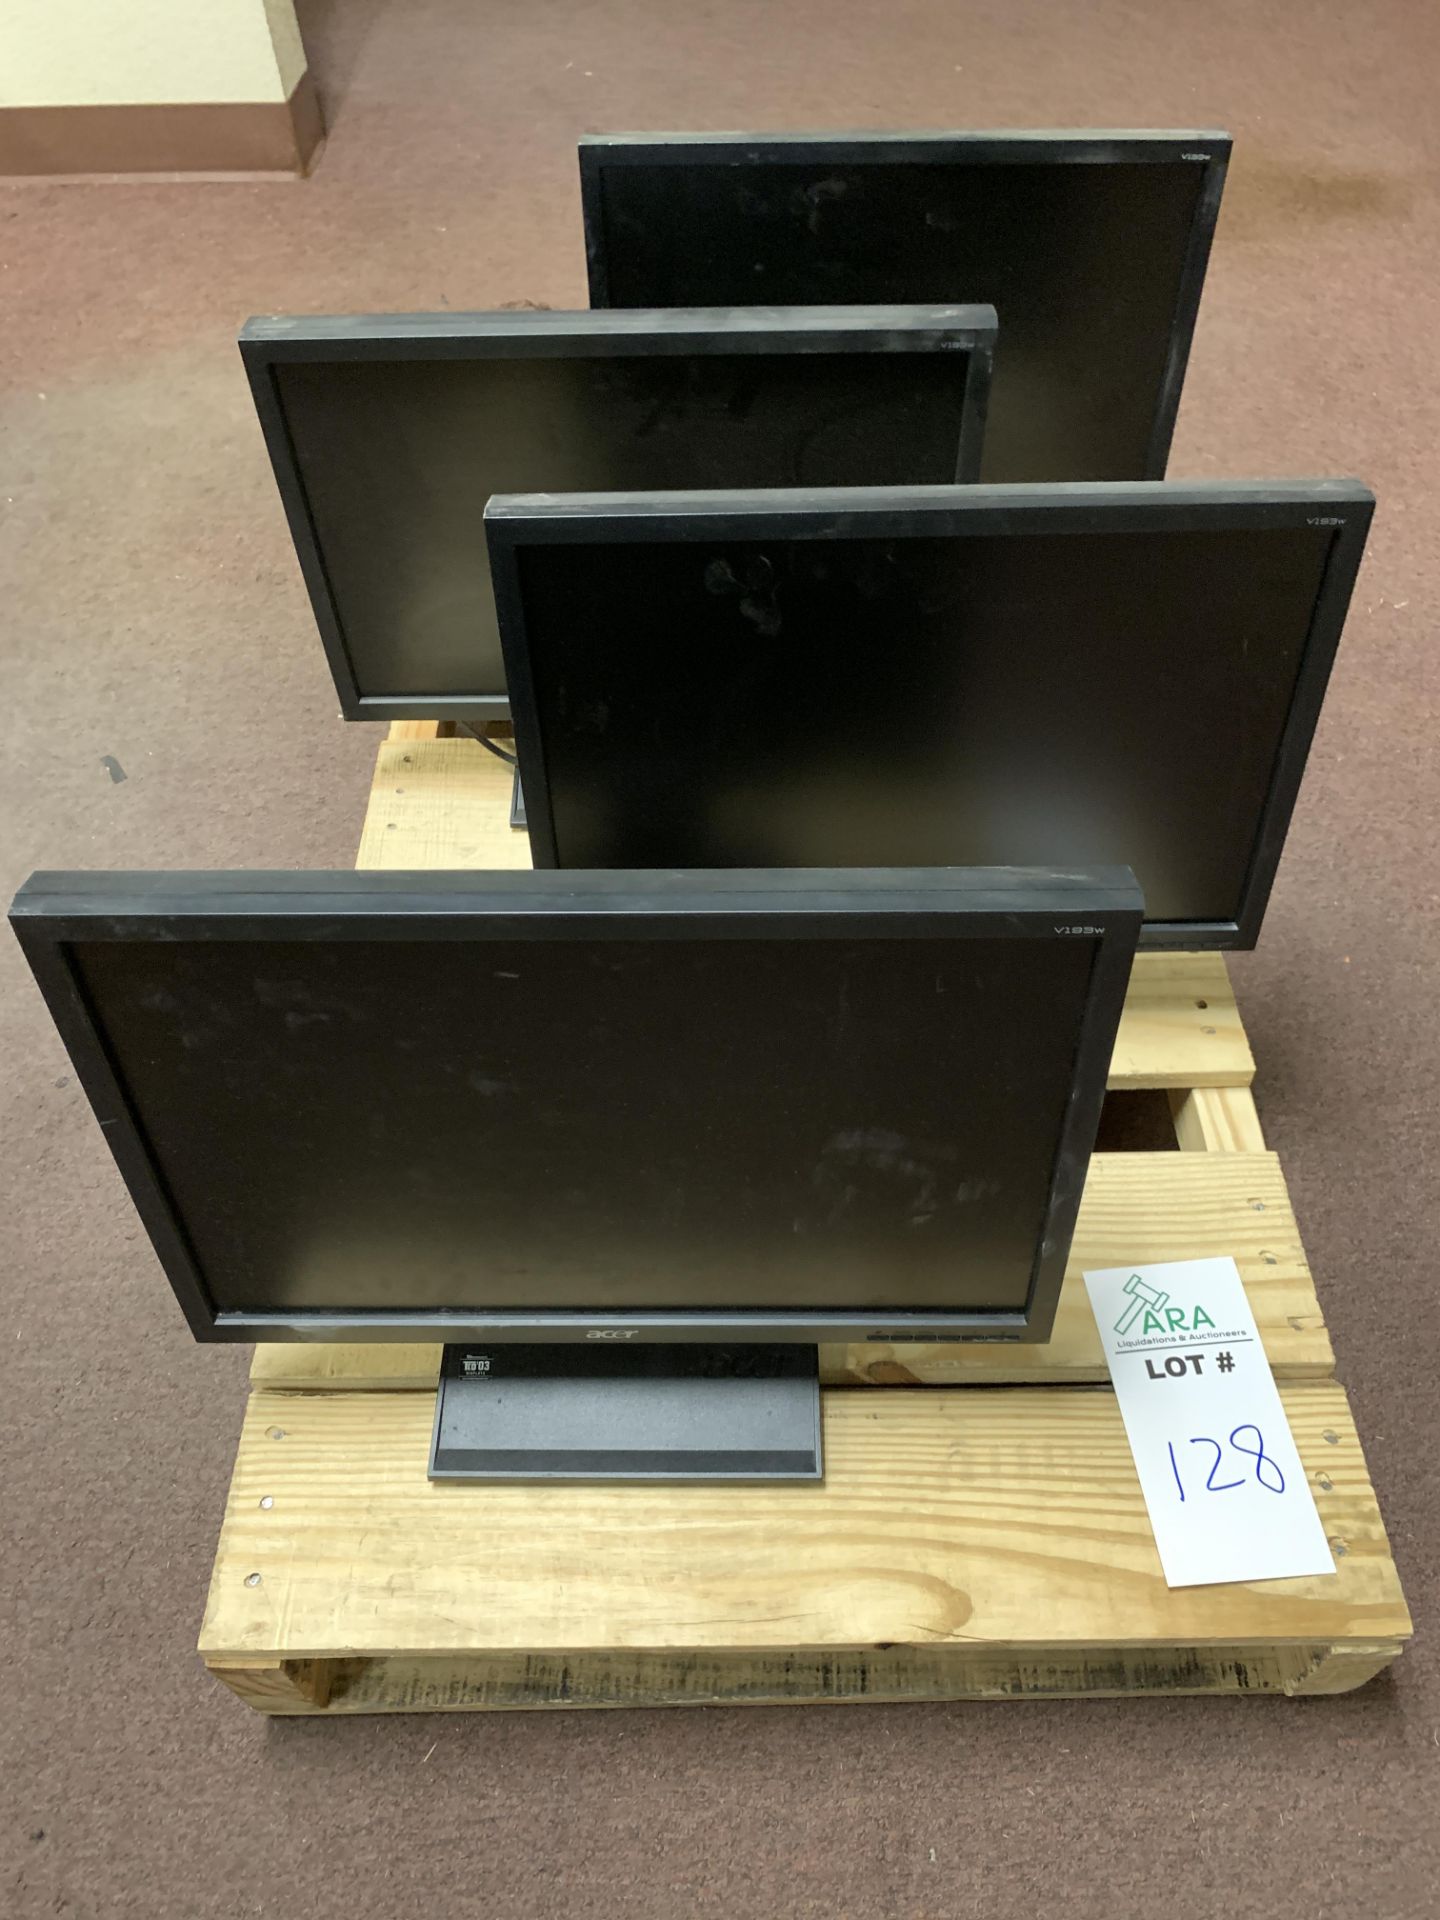 4 ACER V193W MONITORS.  ALL ITEMS ARE SOLD AS IS UNTESTED BUT CAME FROM A WORKING ENVIRONMENT. NOT